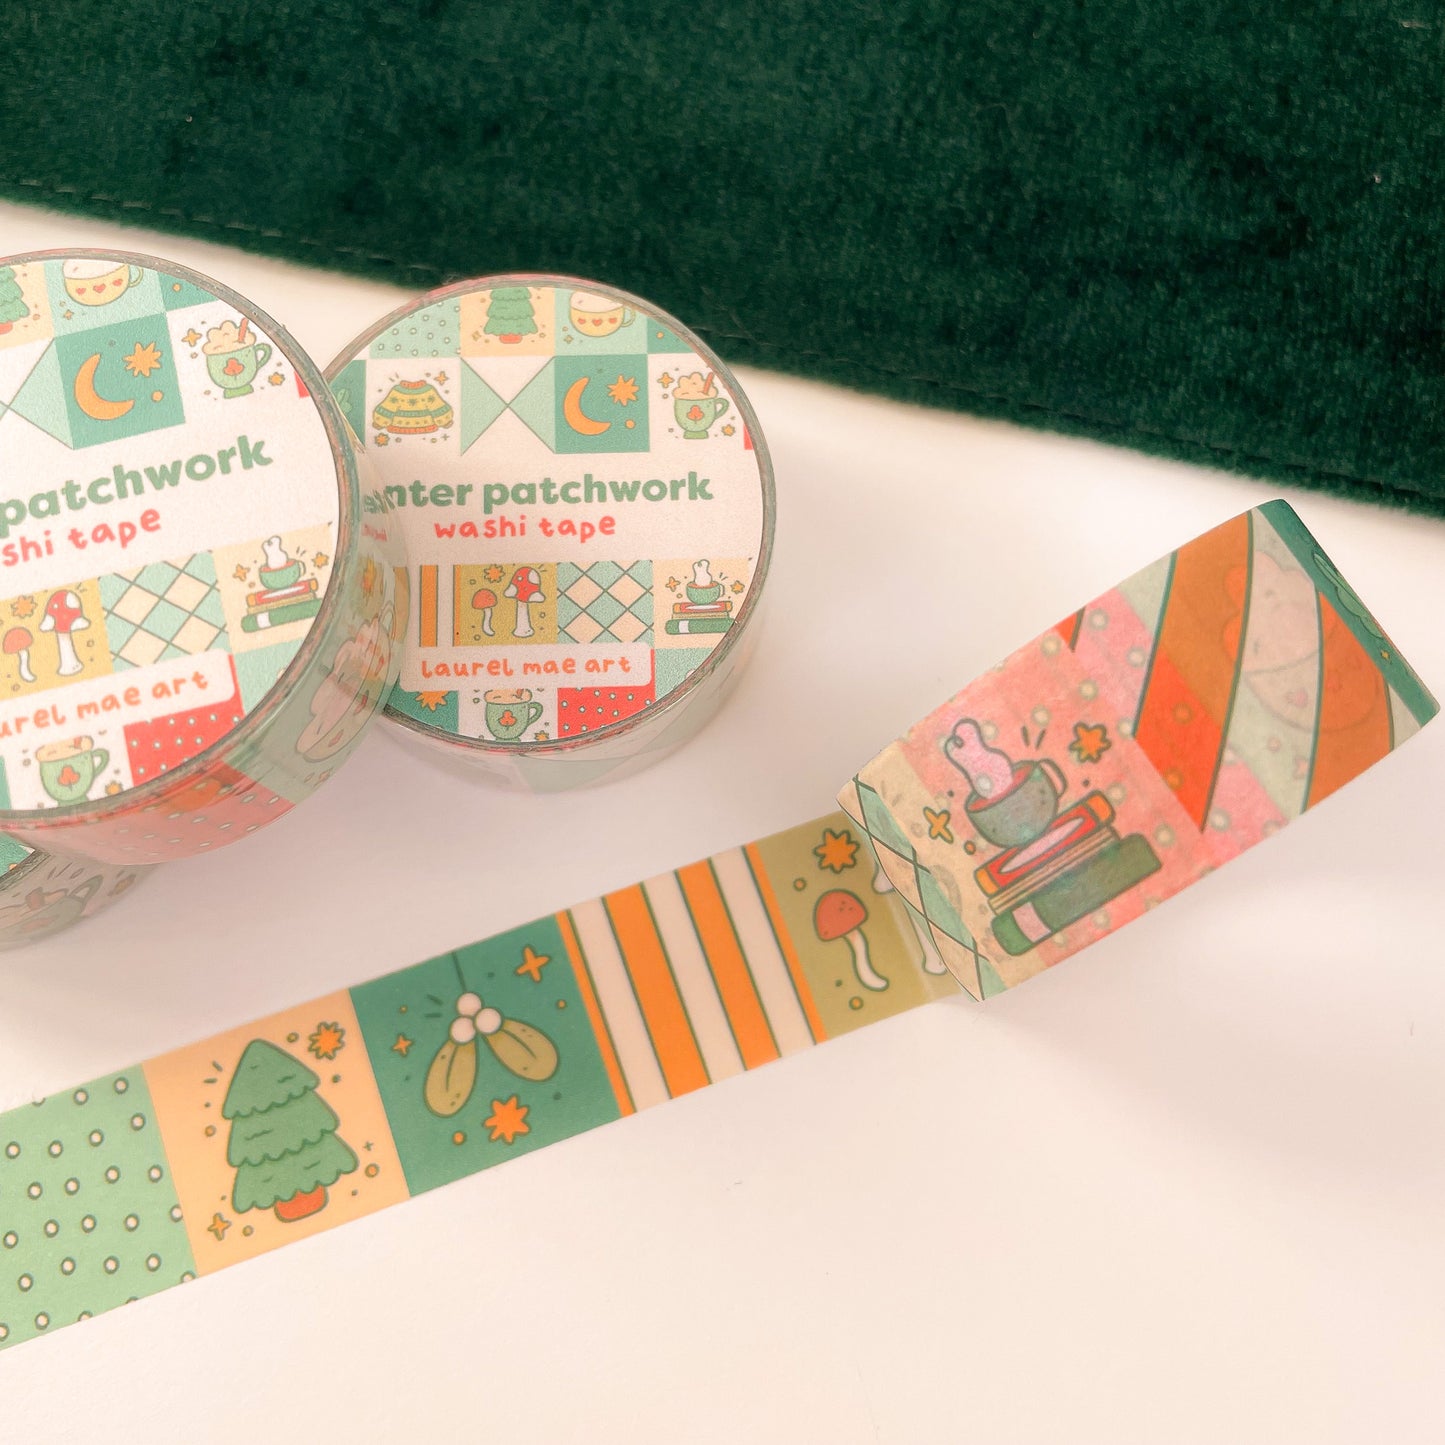 Winter Patchwork - Chunky Washi Tape